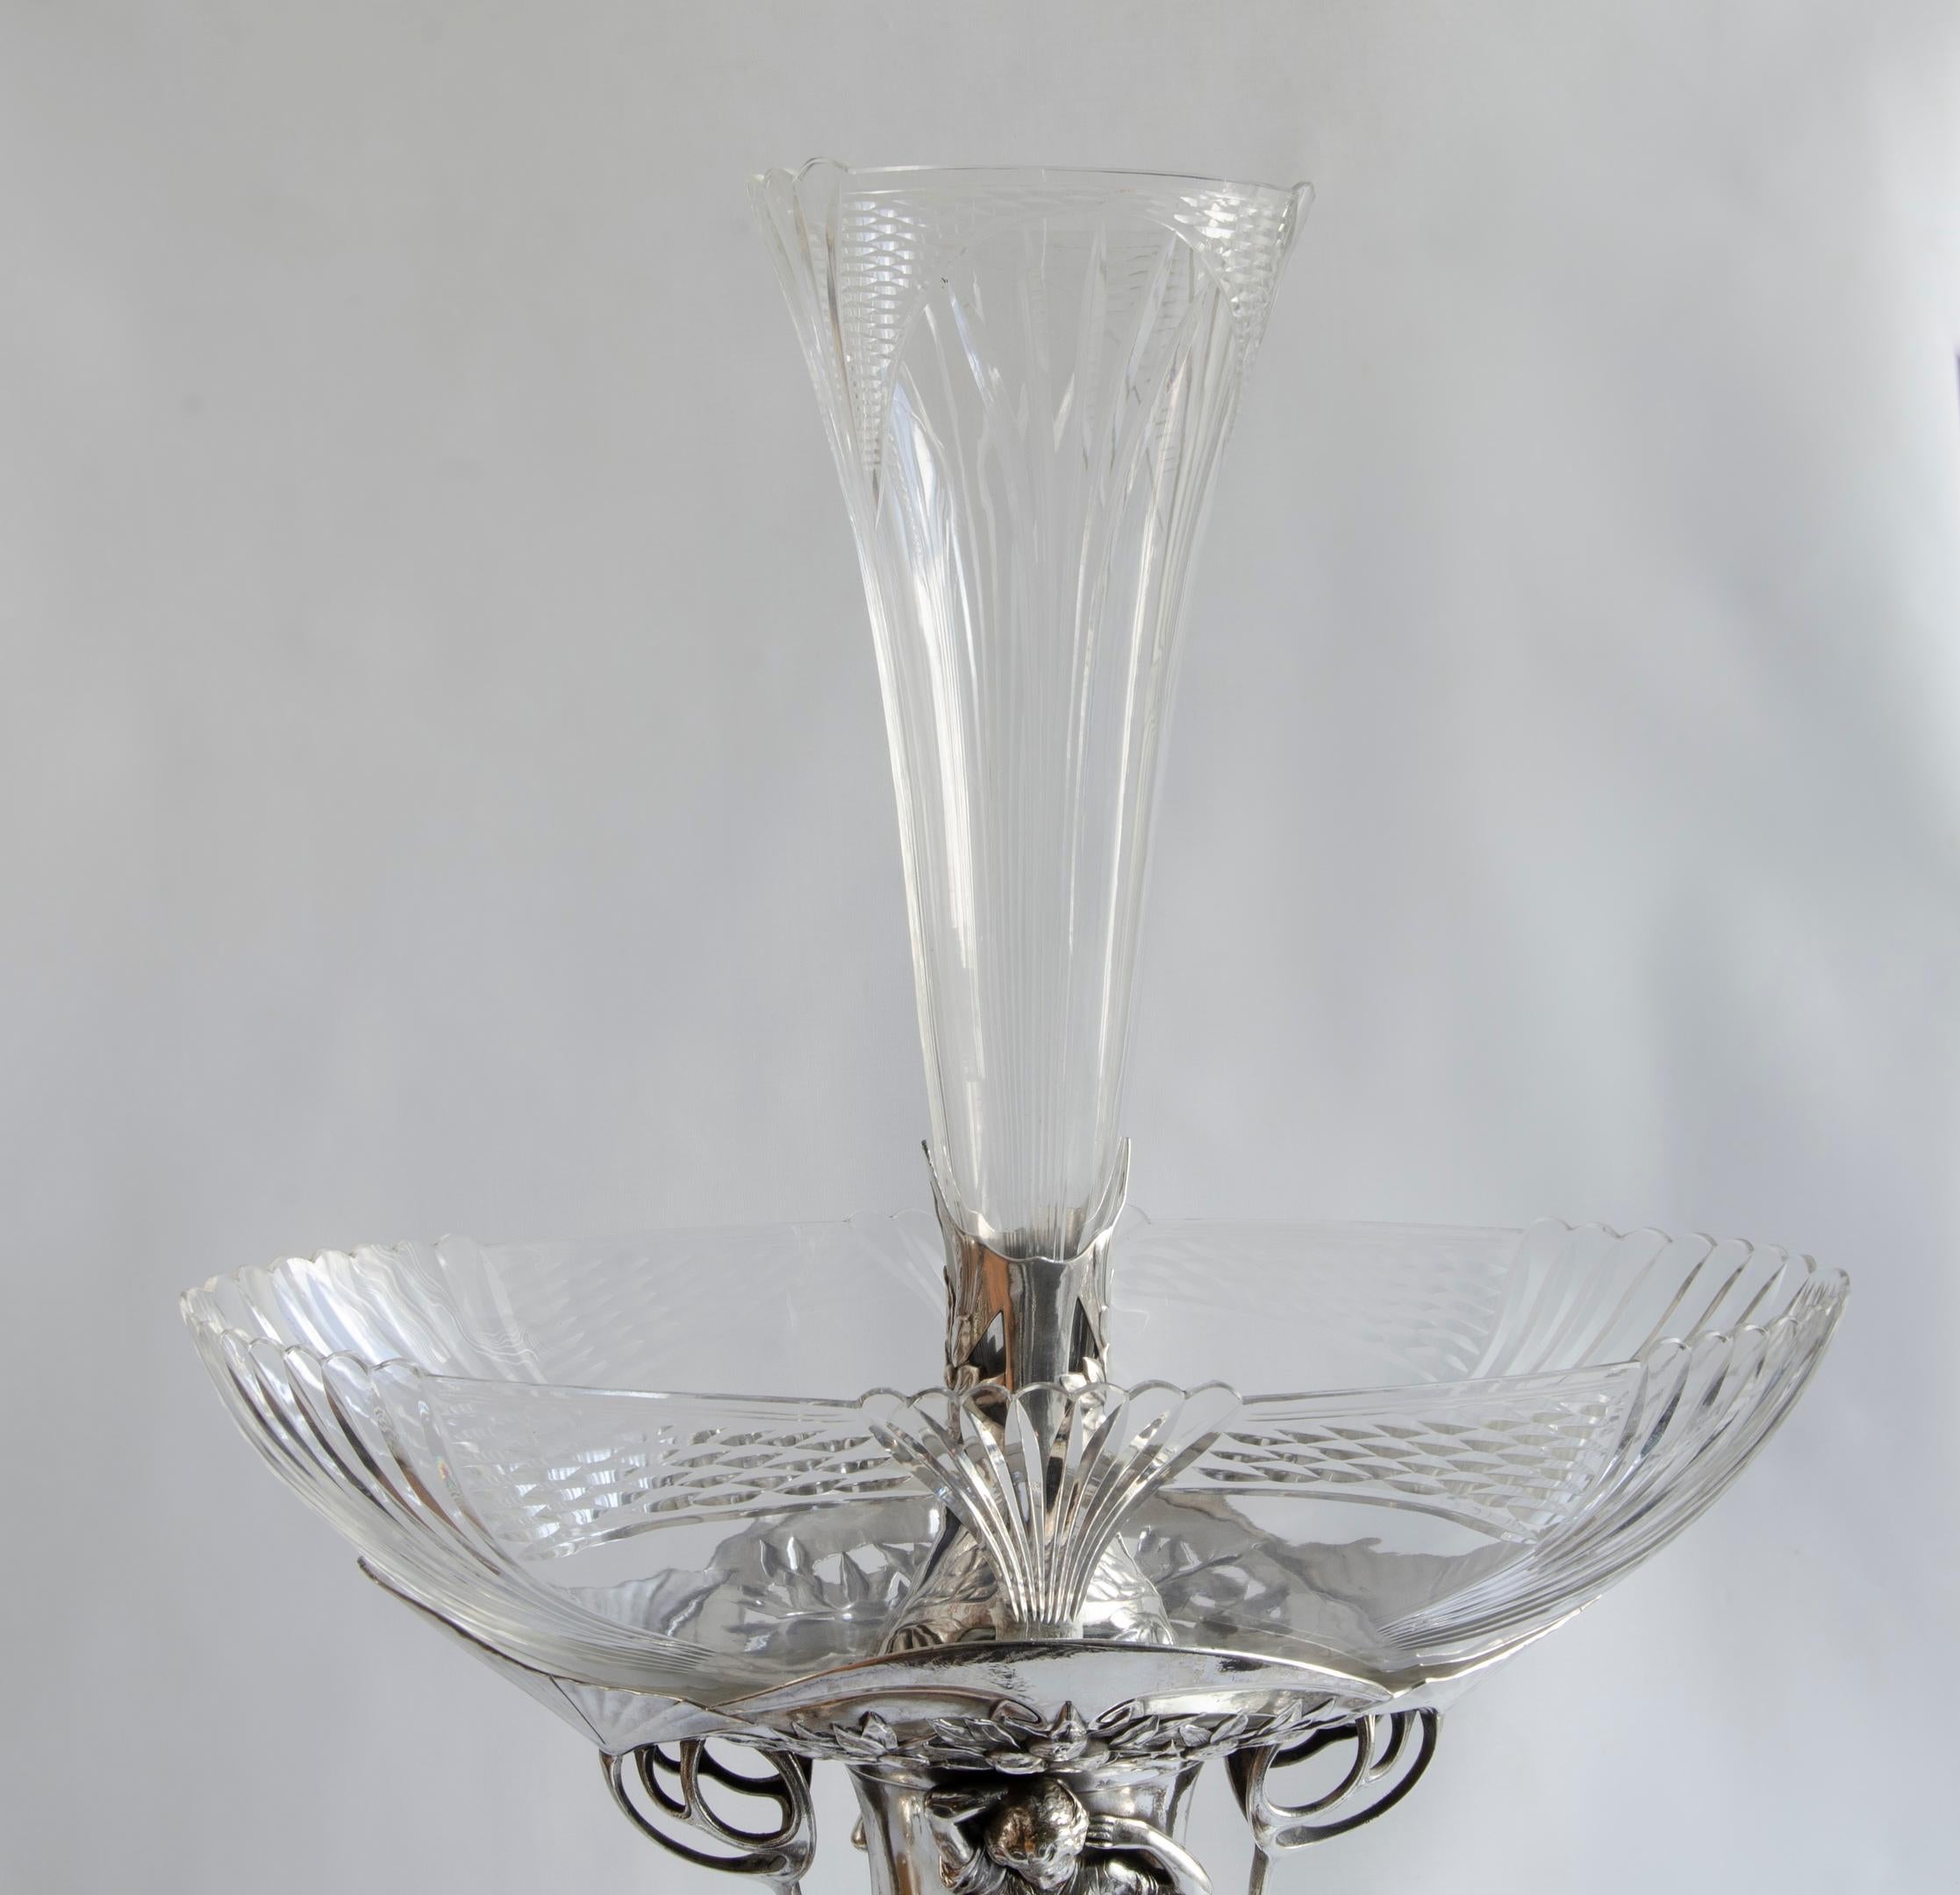 Planter origin Germany
attributed to WMF,
circa 1900
electro plated perfect condition
original glasses
silver pewter
monumental size.
Art nouveau, modernist art or modernism was an international artistic and decorative movement, developed between